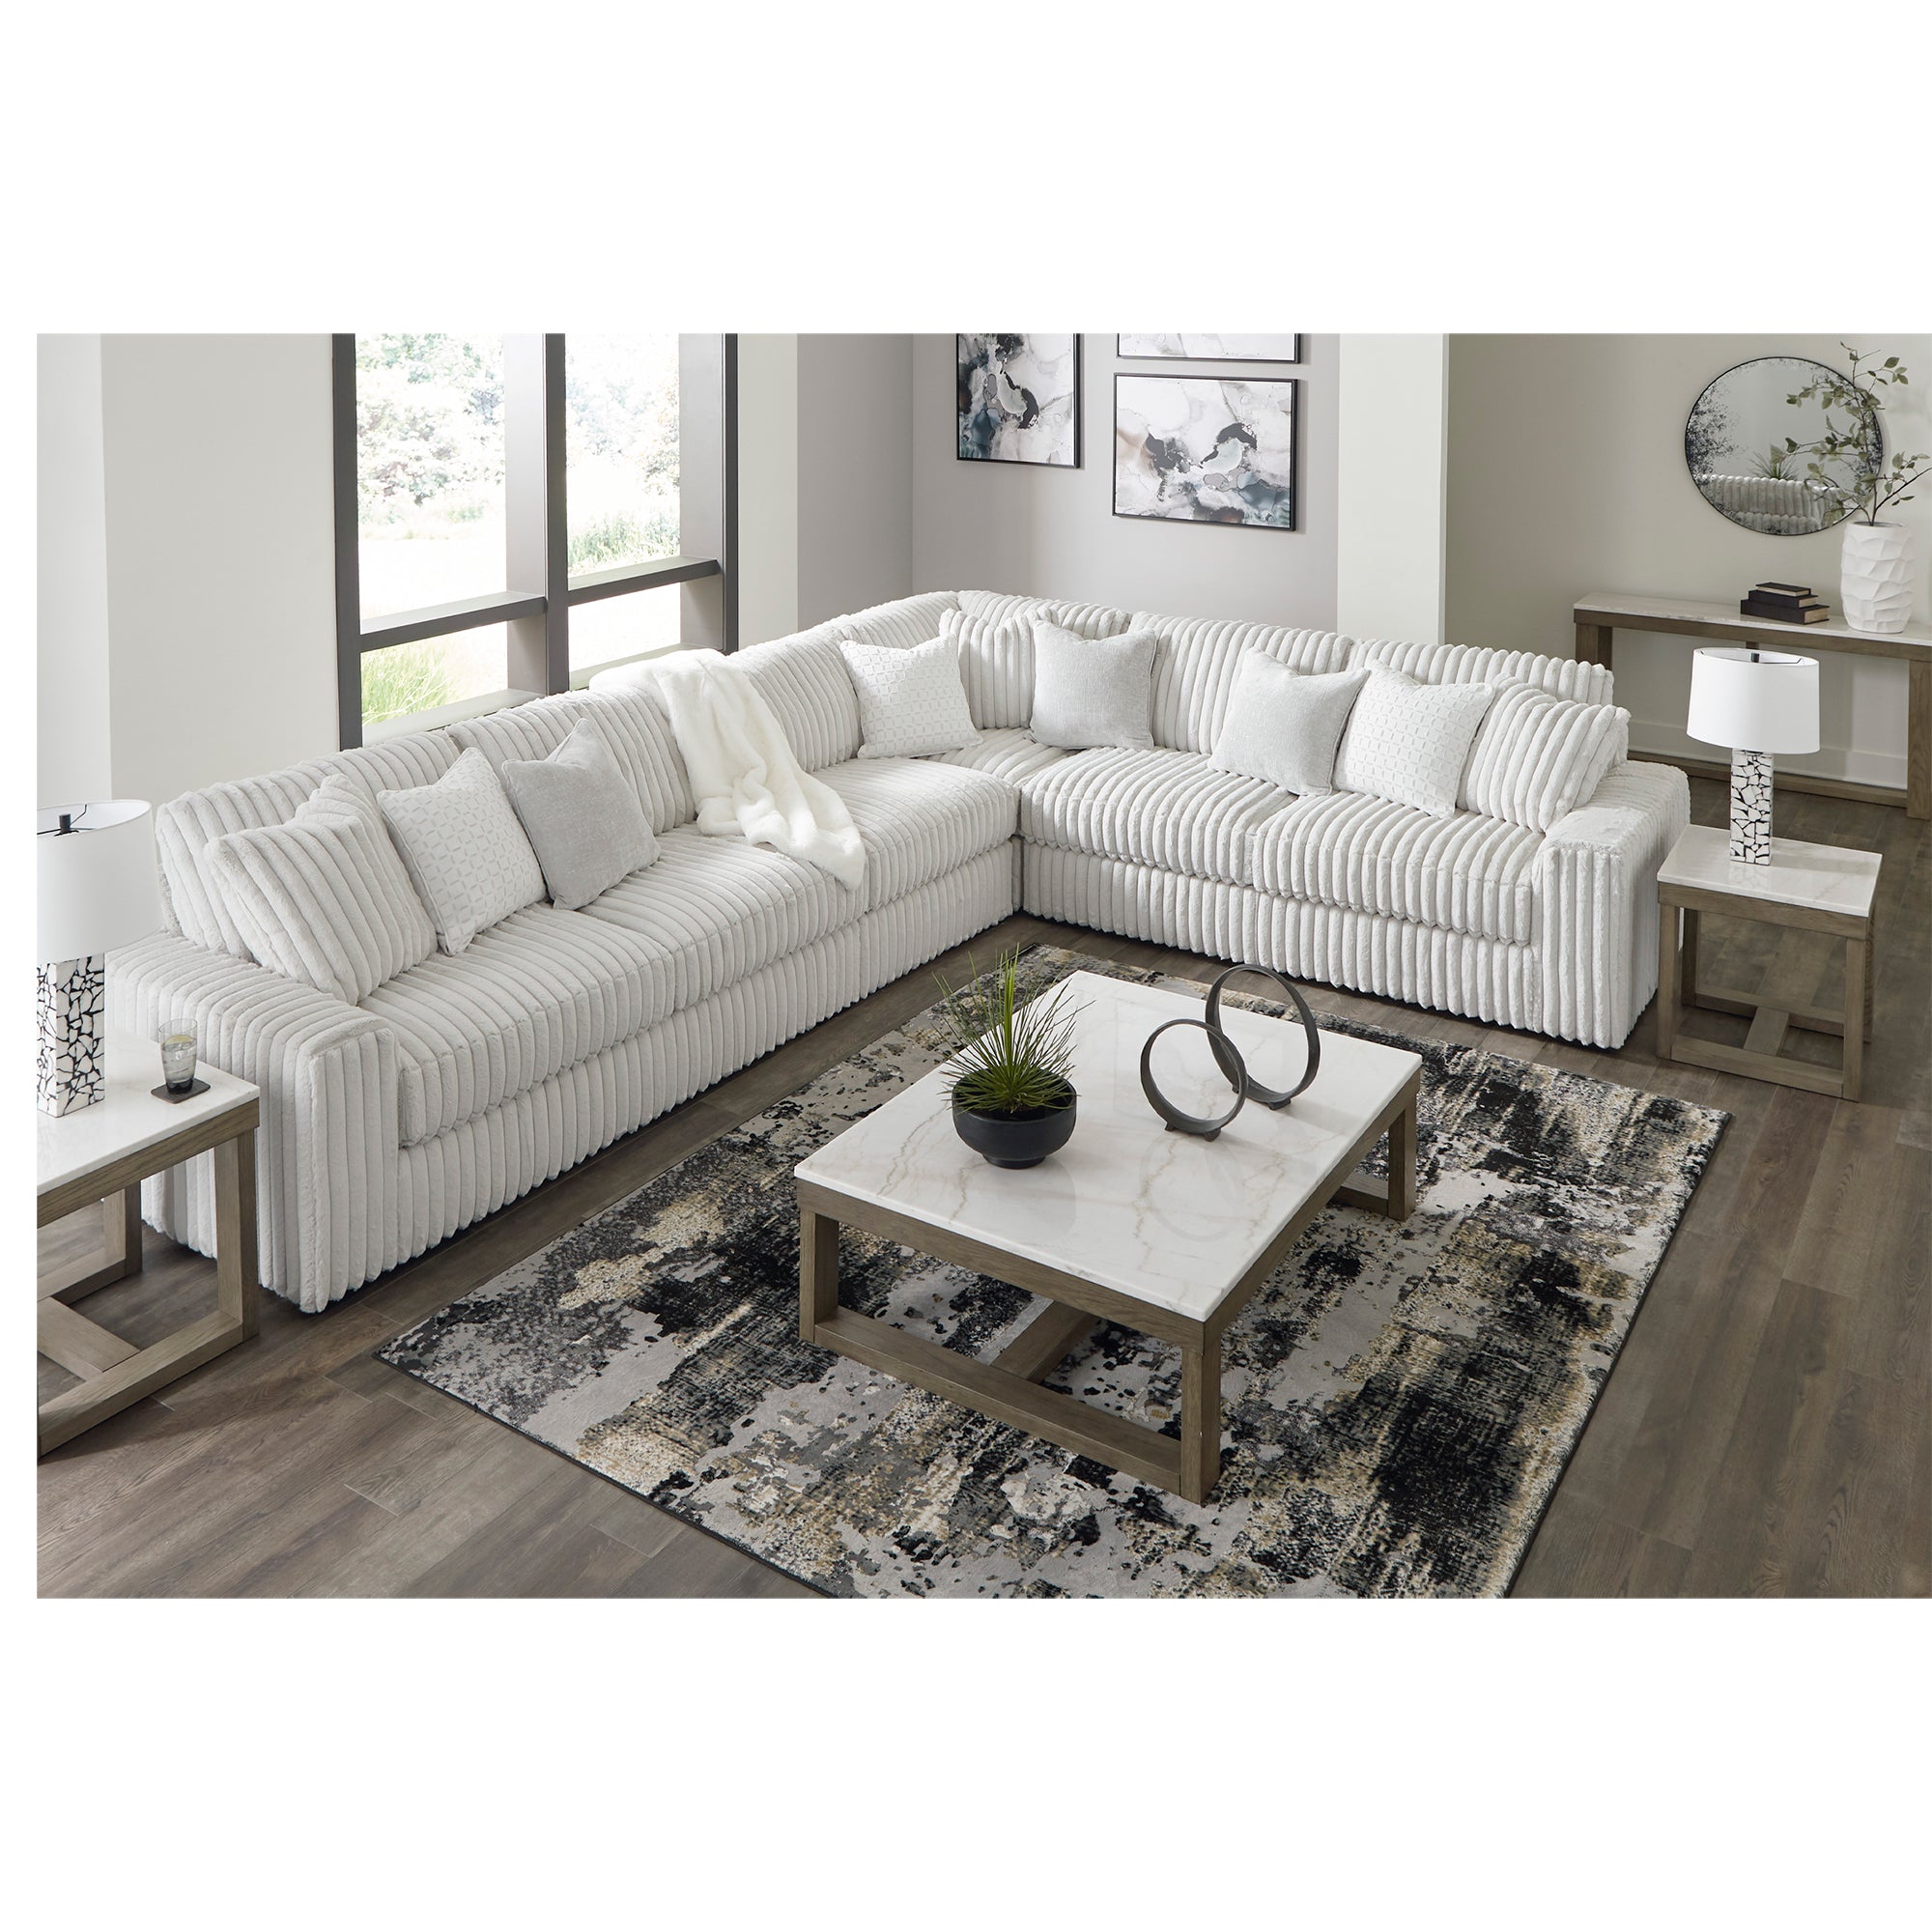 Functional Stupendous 4-Piece Sectional with durable corner-blocked frame and stylish accent pillows included